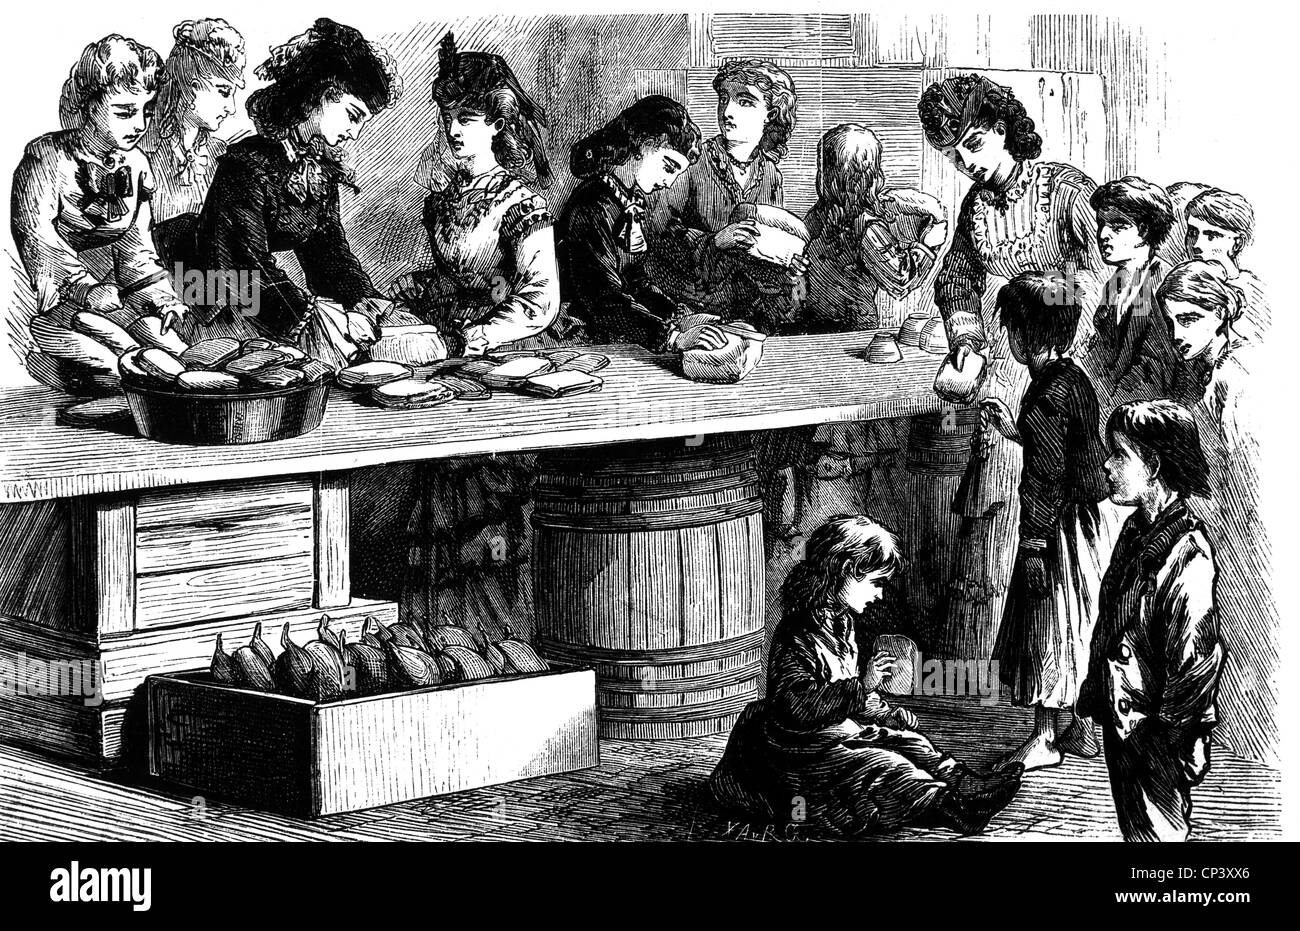 fire, fires, Great Chicago Fire, 8.- 10.10.1871, ladies giving food to children, wood engraving, 'Das Buch fuer Alle', Stuttgart, Germany, 1872, Additional-Rights-Clearences-Not Available Stock Photo